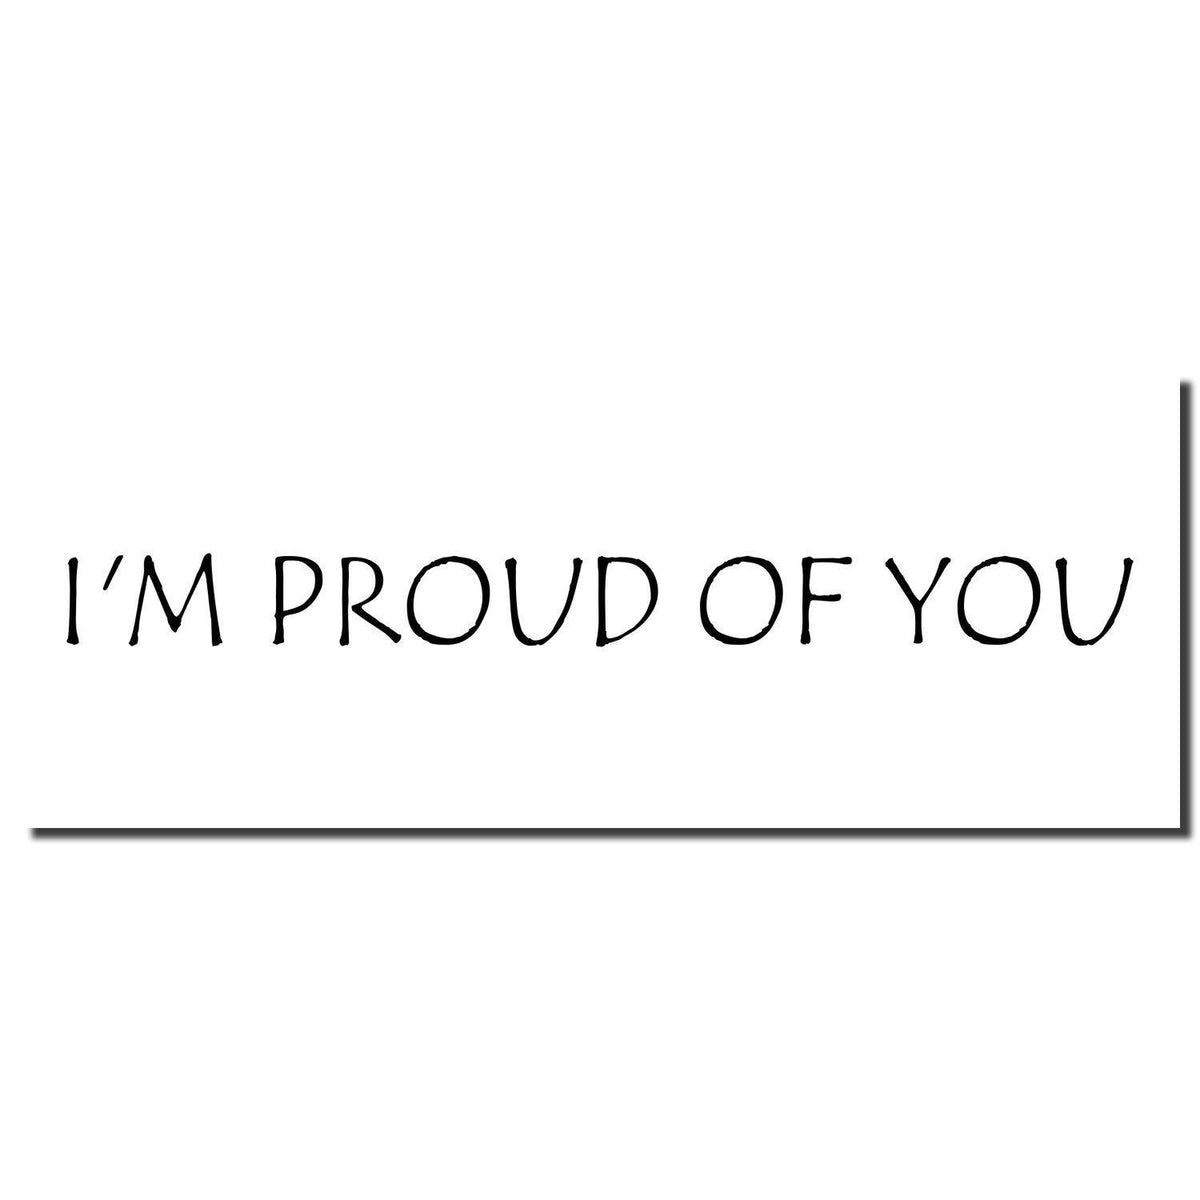 Enlarged Imprint Im Proud Of You Rubber Stamp Sample